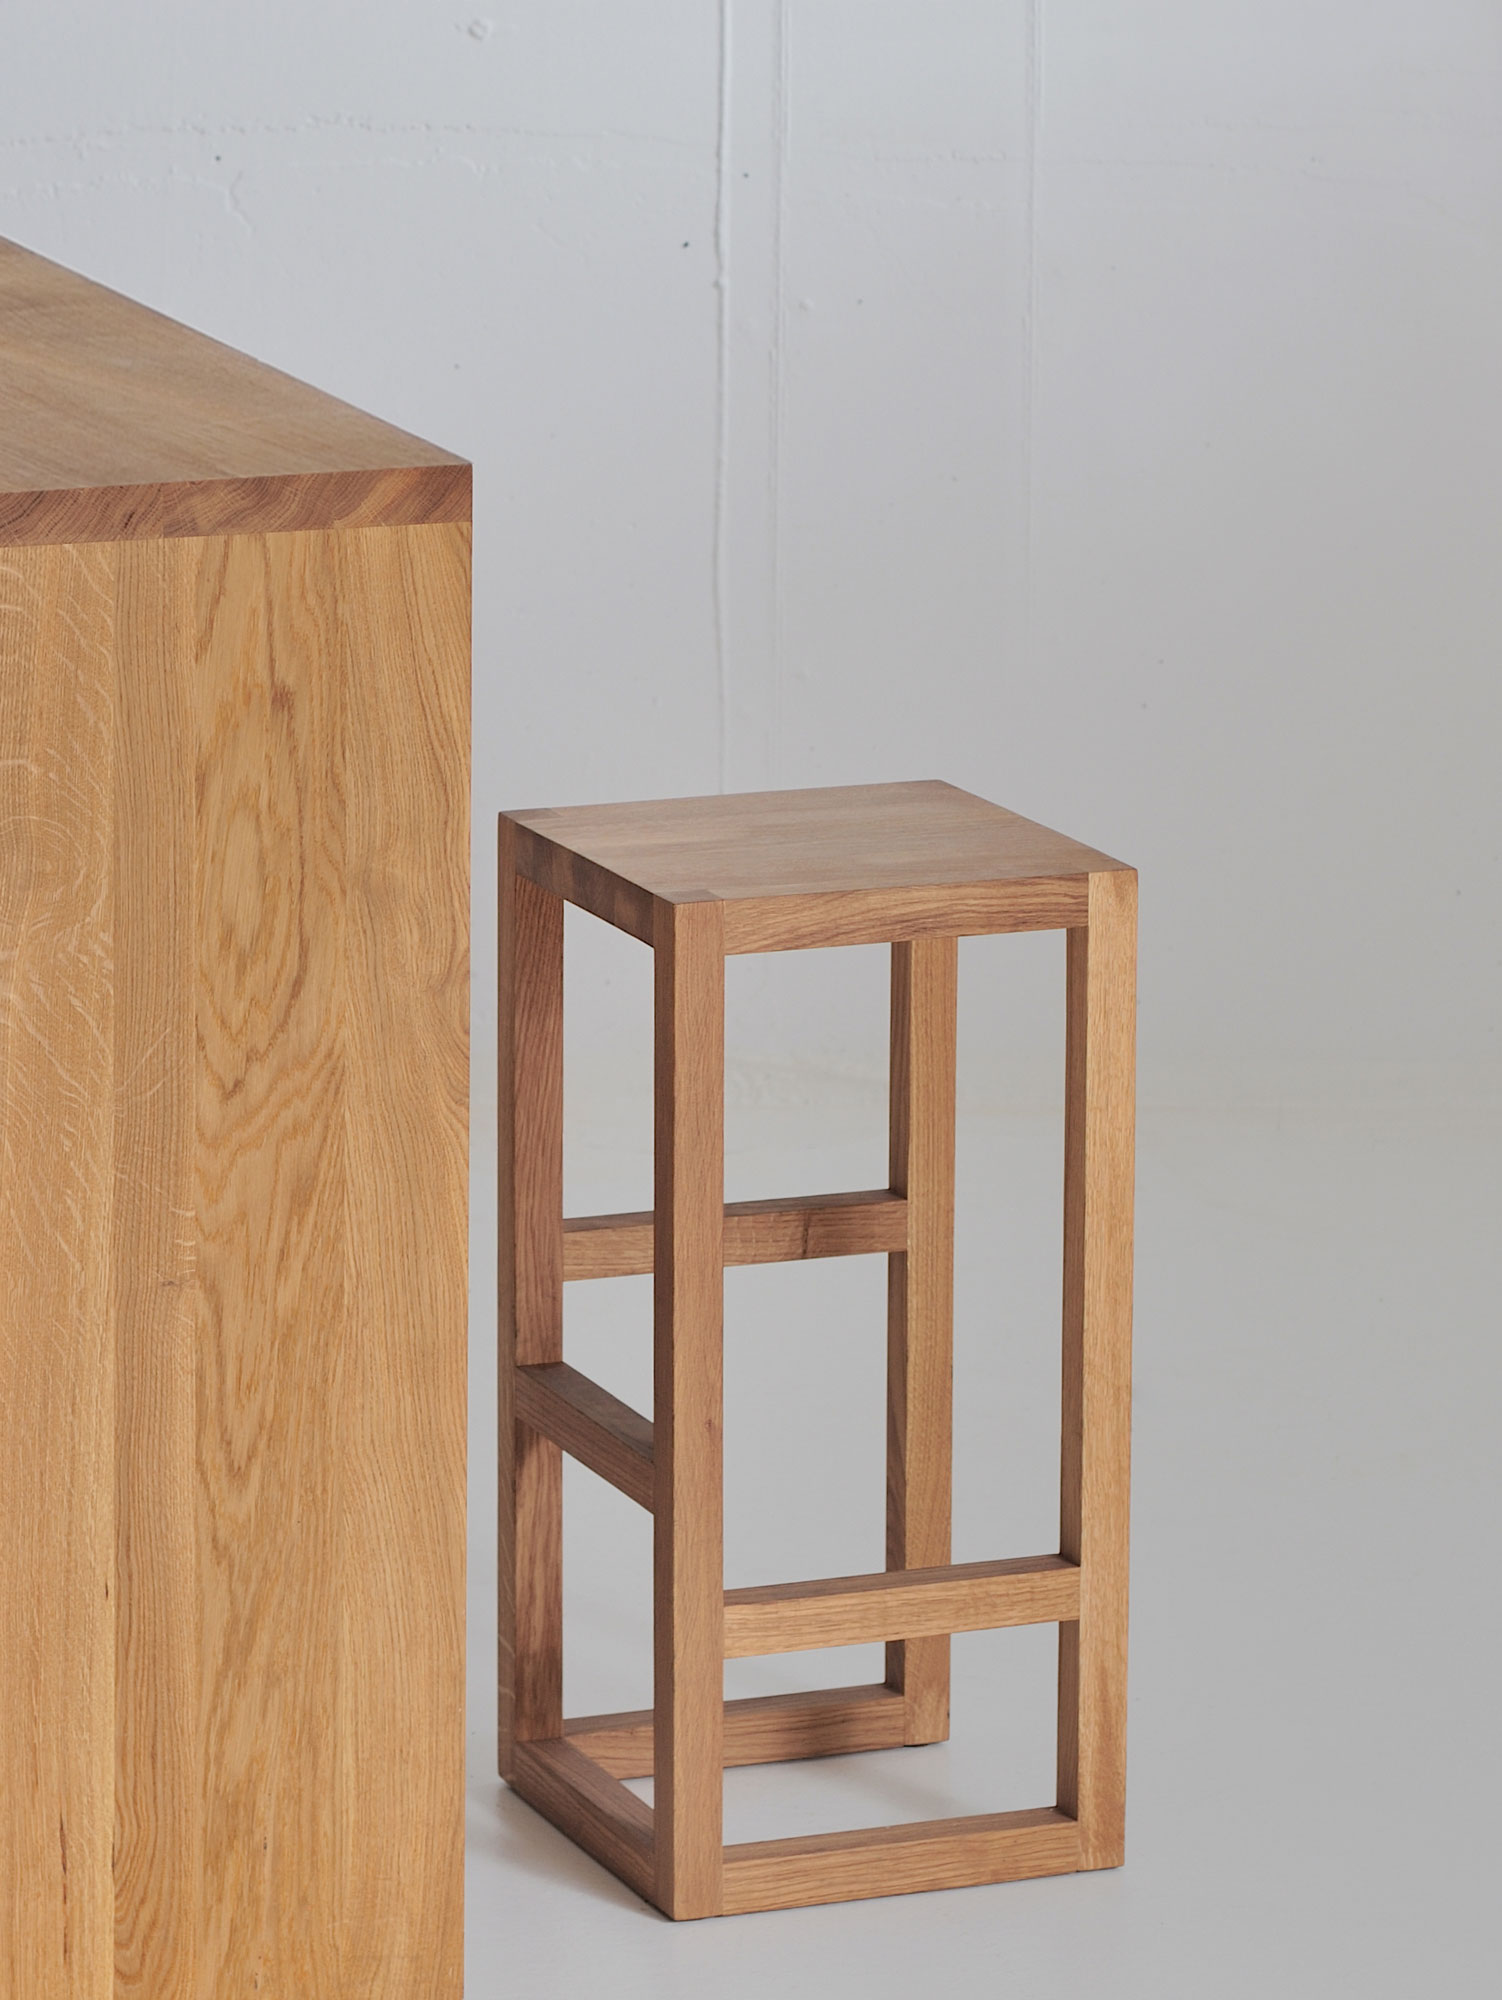 Bar Stool Solid Wood STEP 3725 custom made in solid wood by vitamin design